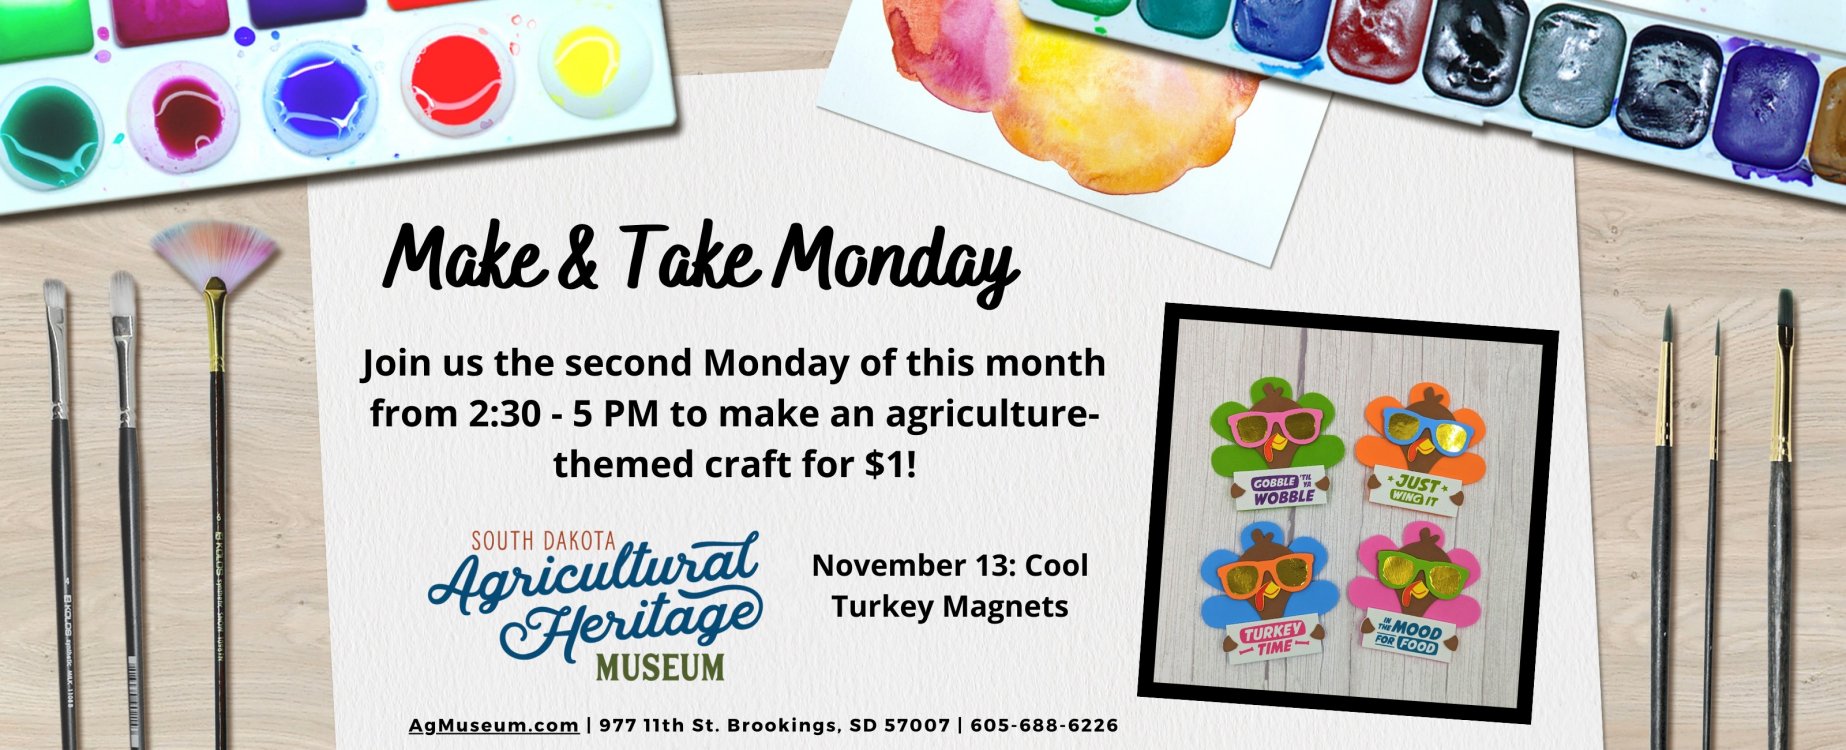 November 13 Make & Take Monday Craft: Cool Turkey Magnets.  Join us on the second Monday of each month from 2:30 to 5 p.m. to make an agriculture-themed craft for $1!